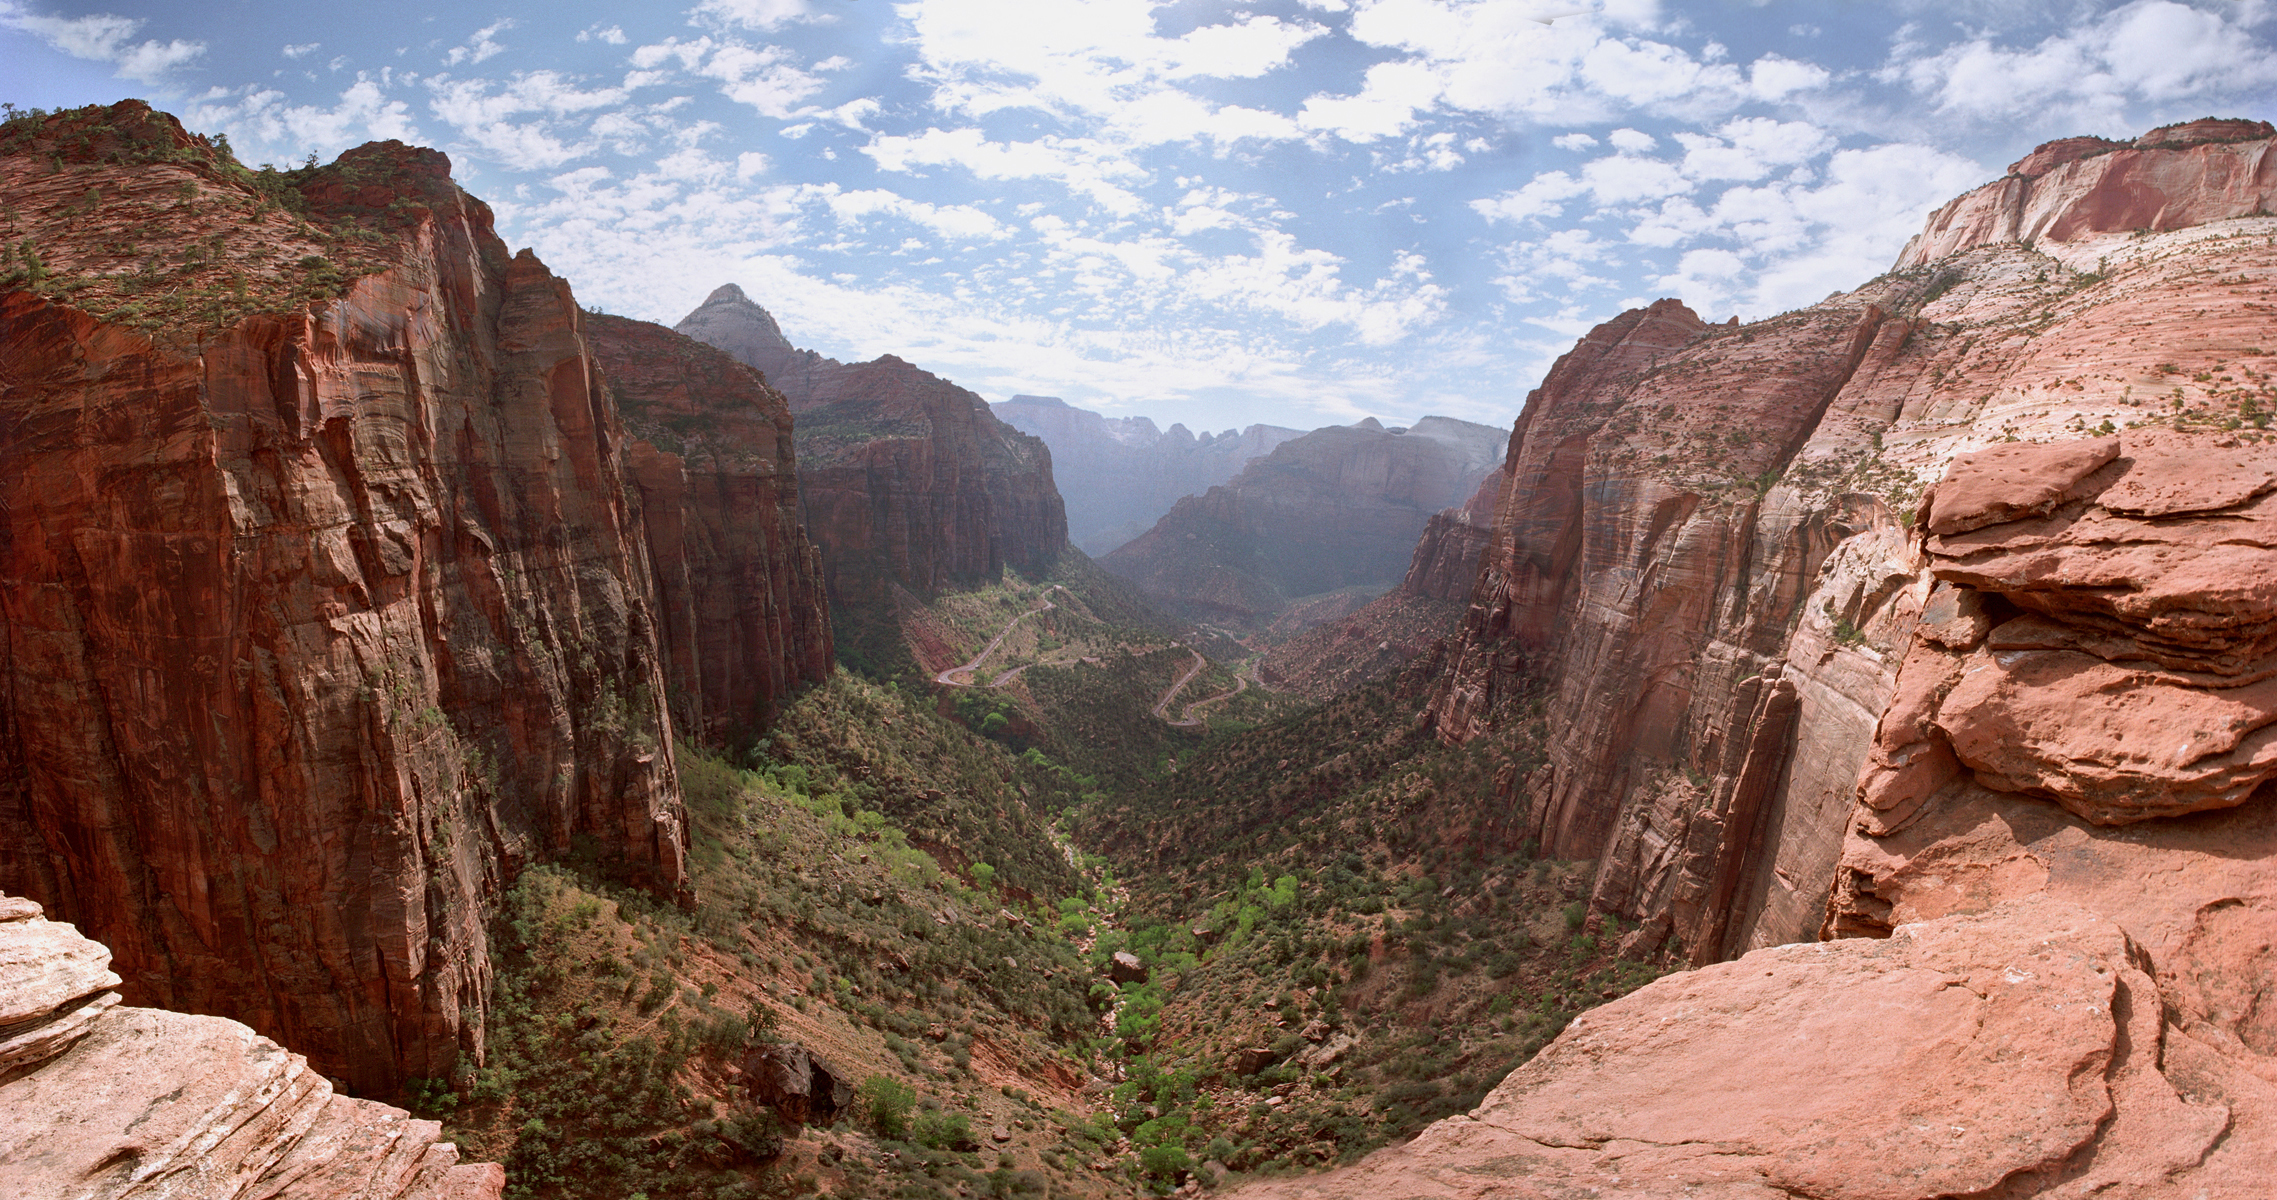 The Beauty, Adventure and History of Zion National Park